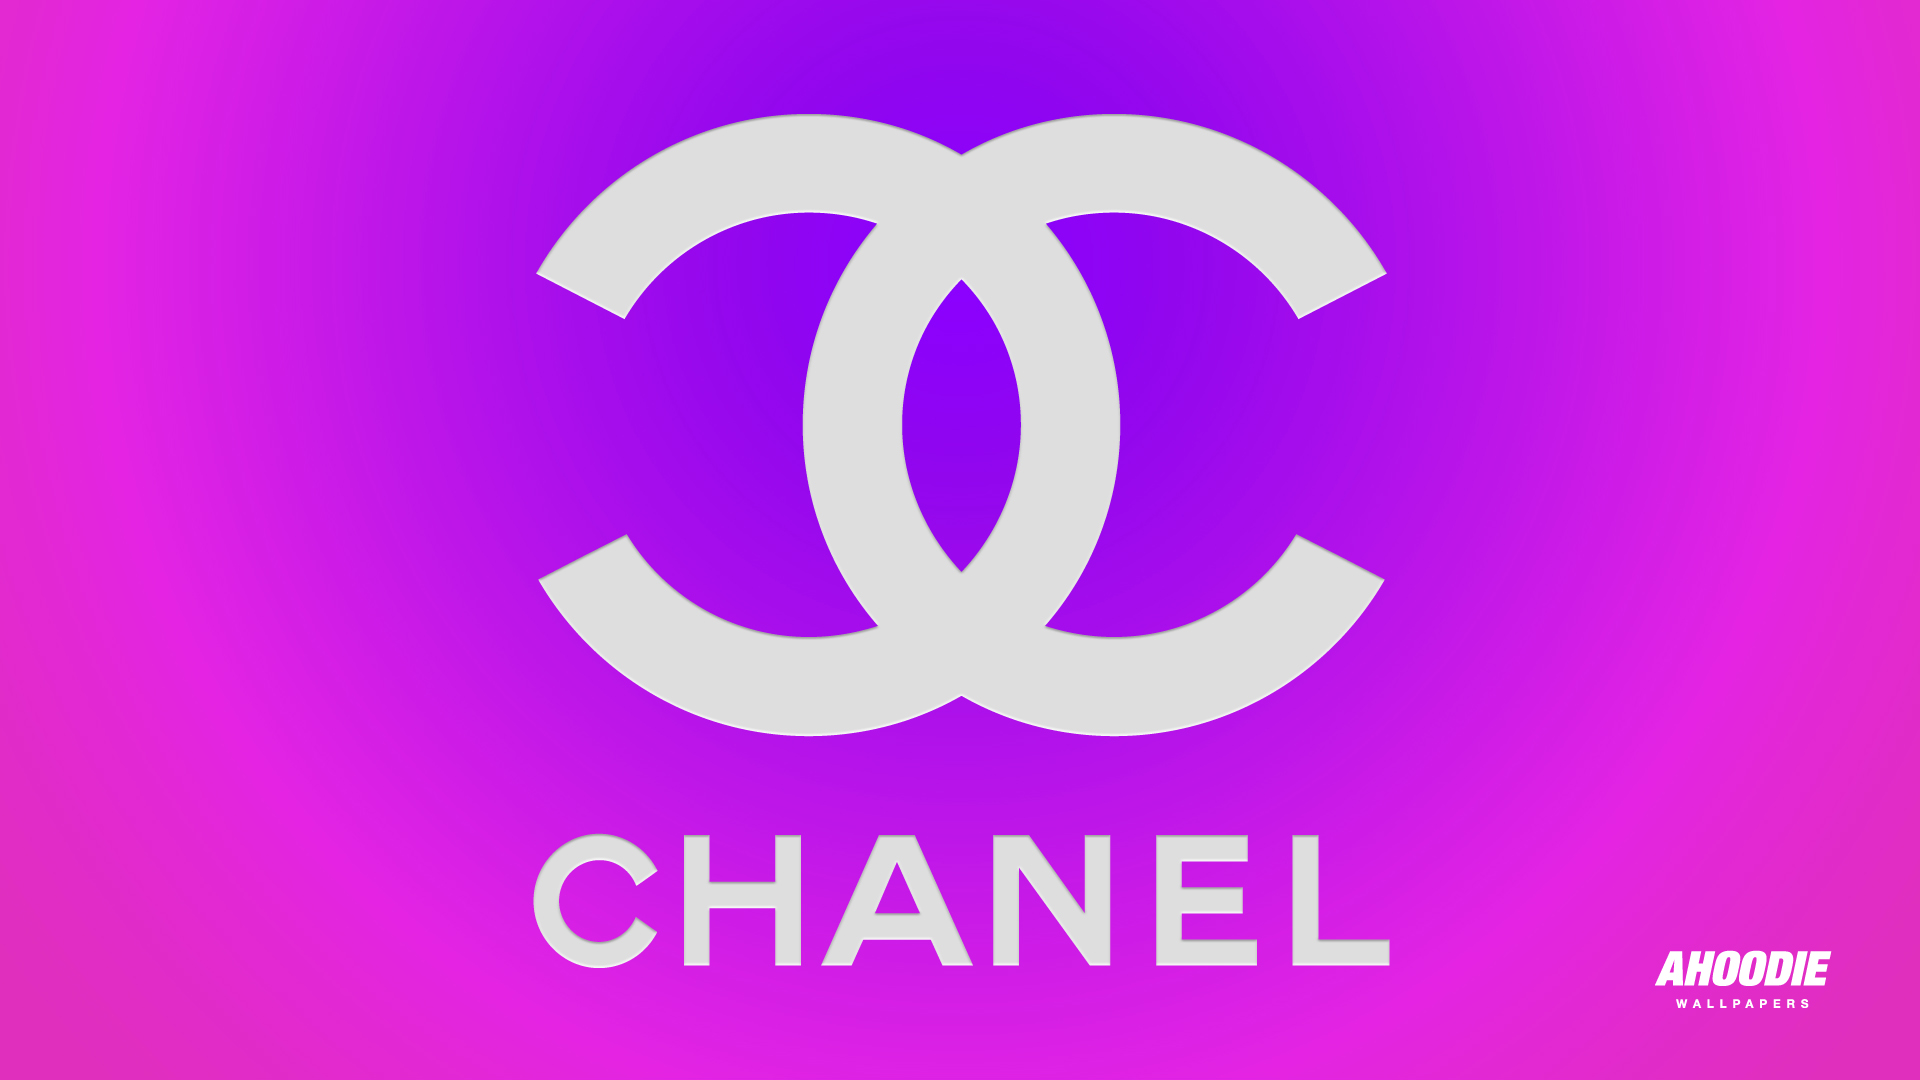 Download Chanel Wallpaper HD Desktop 2014 pictures in high definition 1920x1080